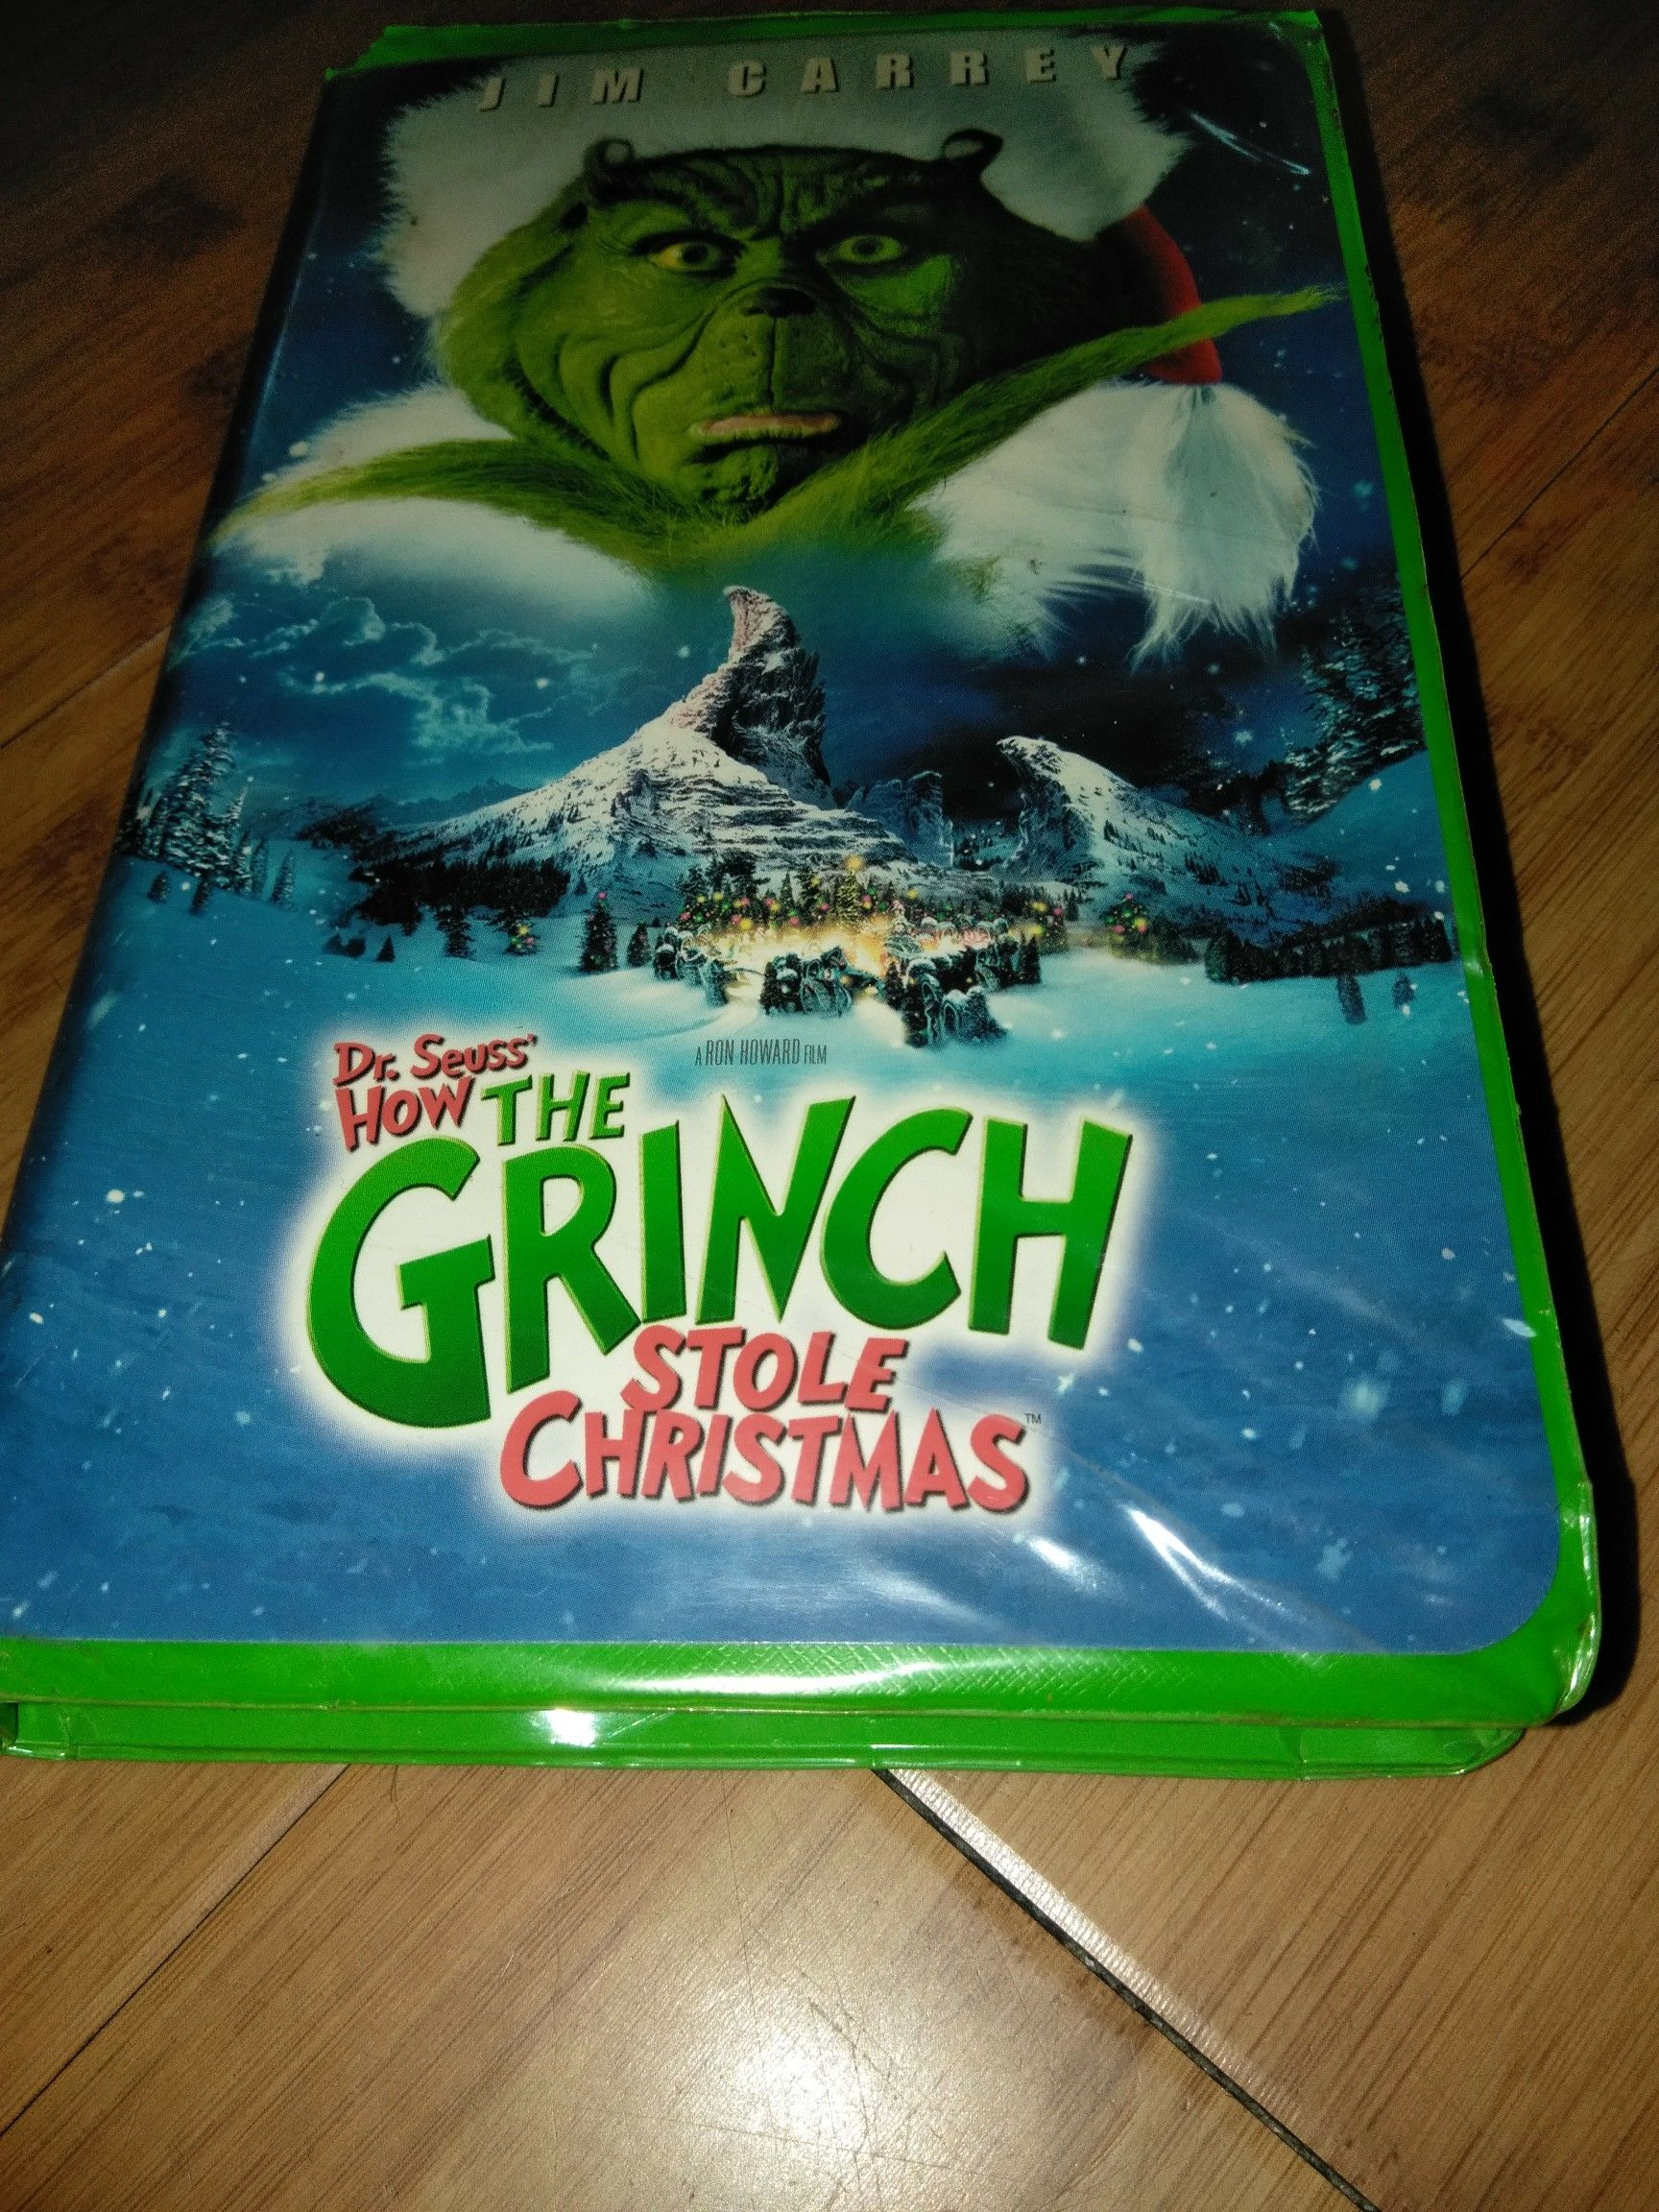 The Grinch who stole Christmas